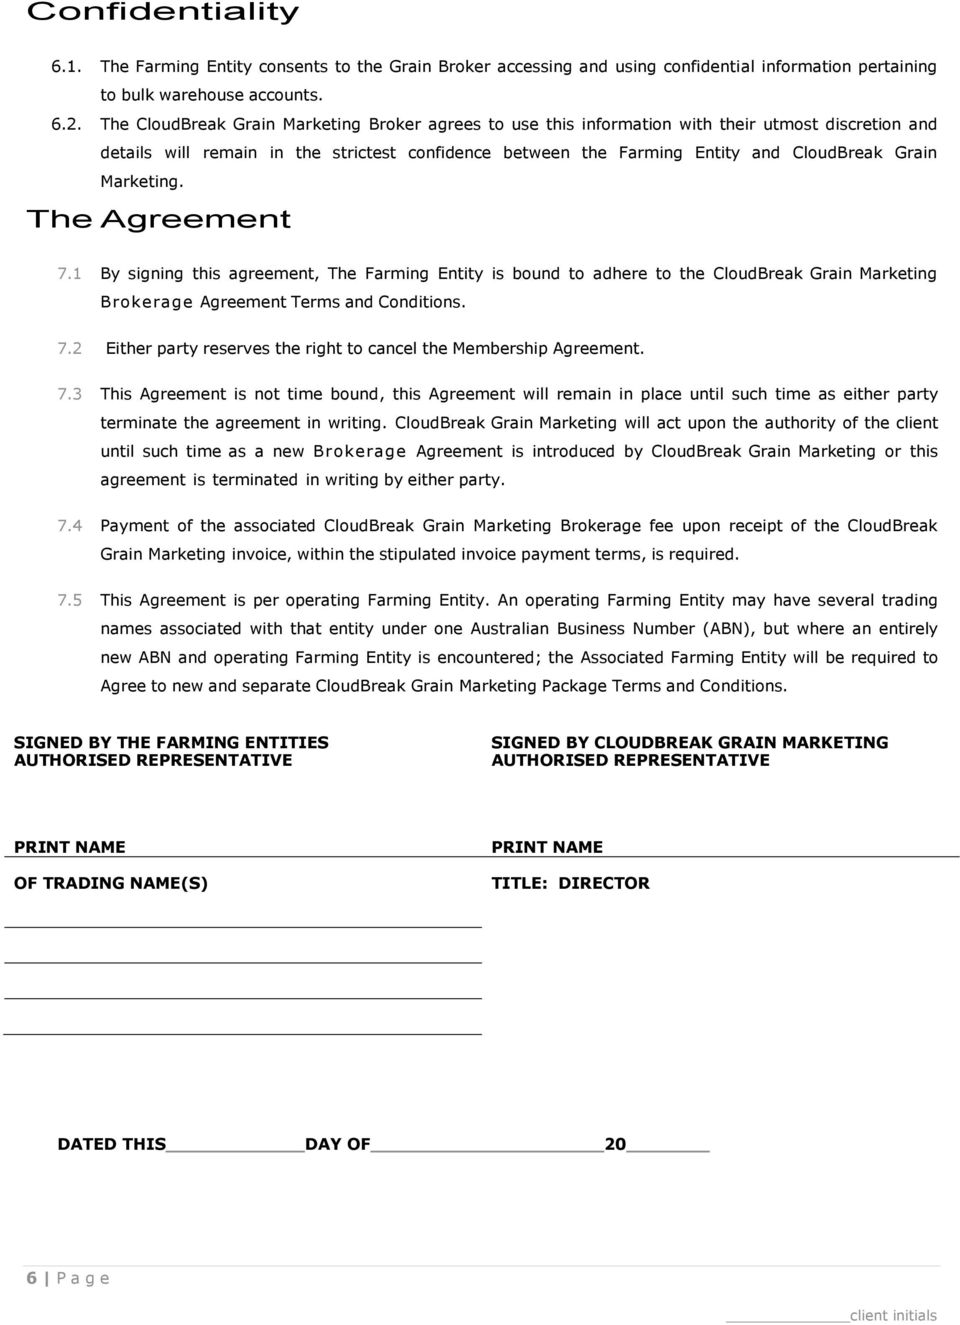 Marketing. The Agreement 7.1 By signing this agreement, The Farming Entity is bound to adhere to the CloudBreak Grain Marketing Brokerage Agreement Terms and Conditions. 7.2 Either party reserves the right to cancel the Membership Agreement.